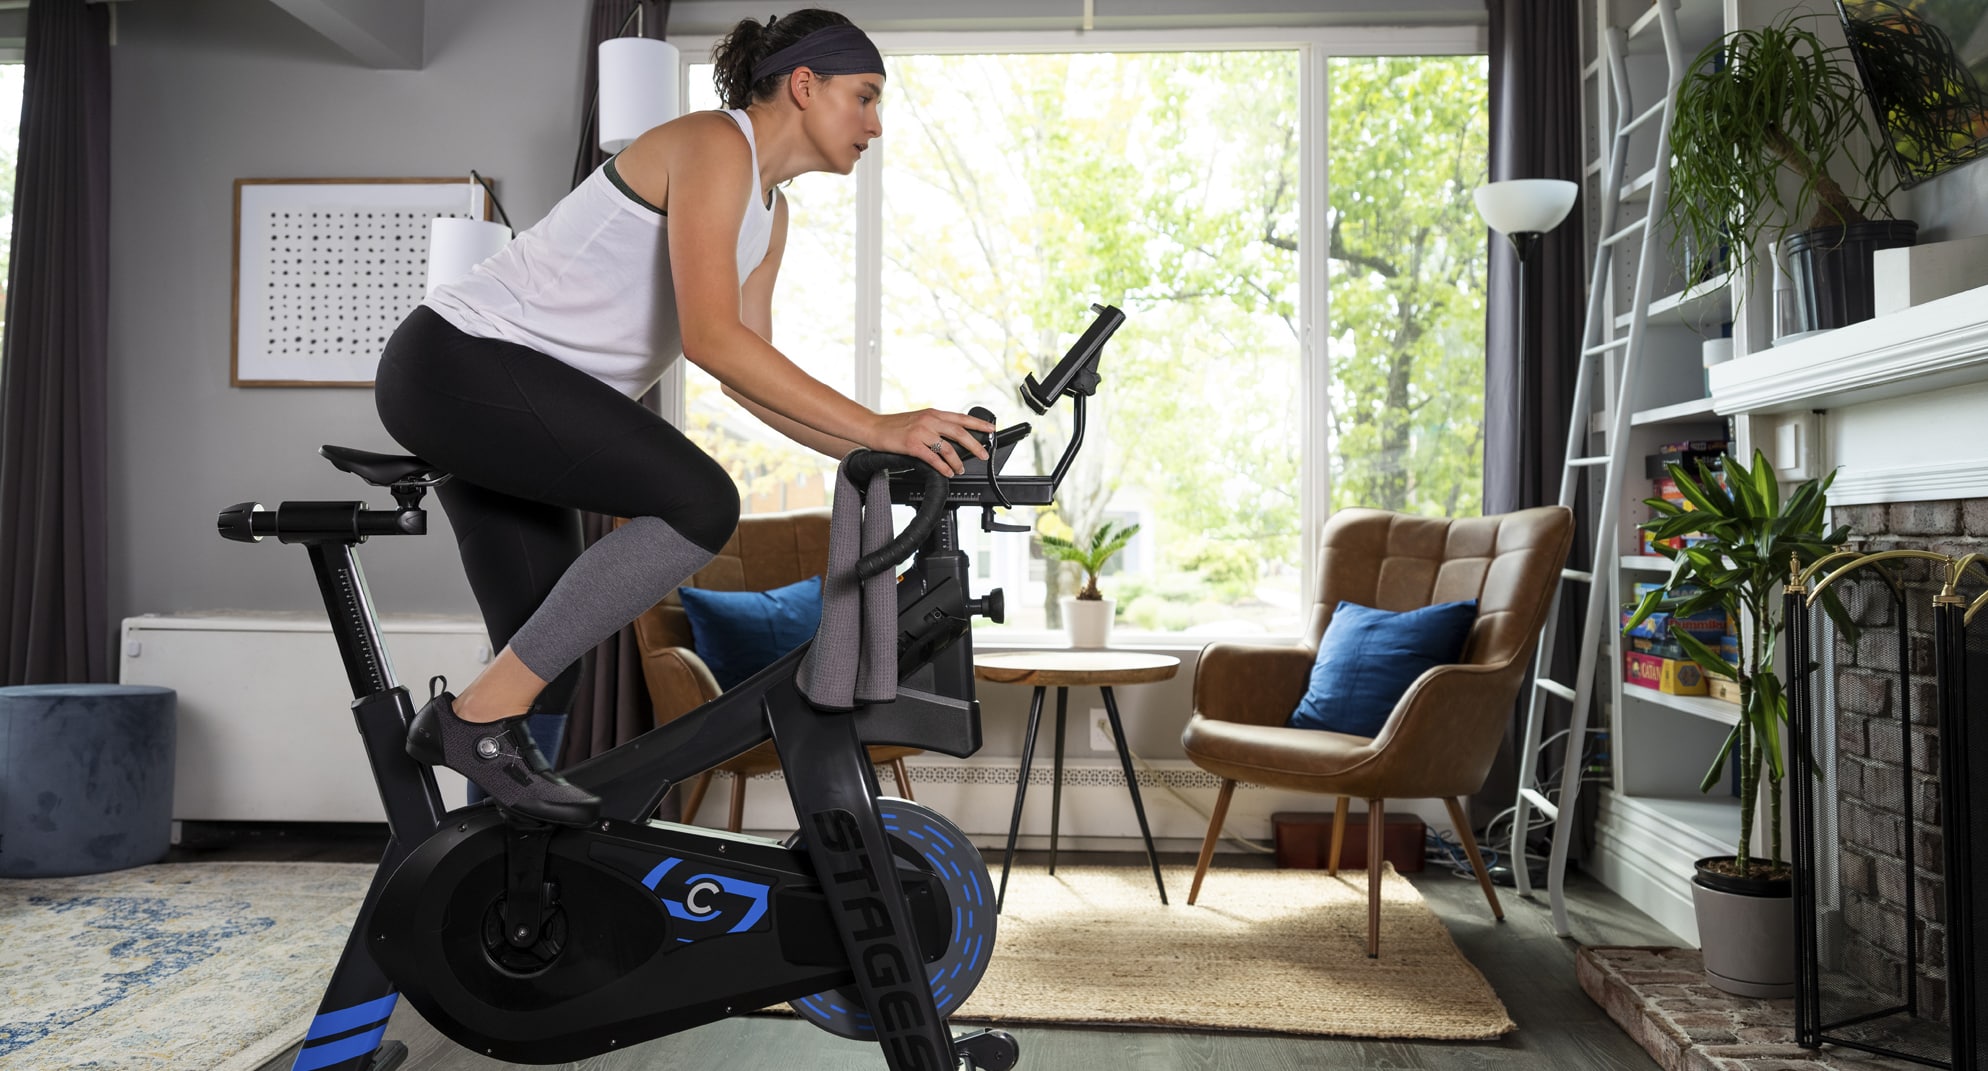 Shimano athlete on indoor cycling-lifestyle